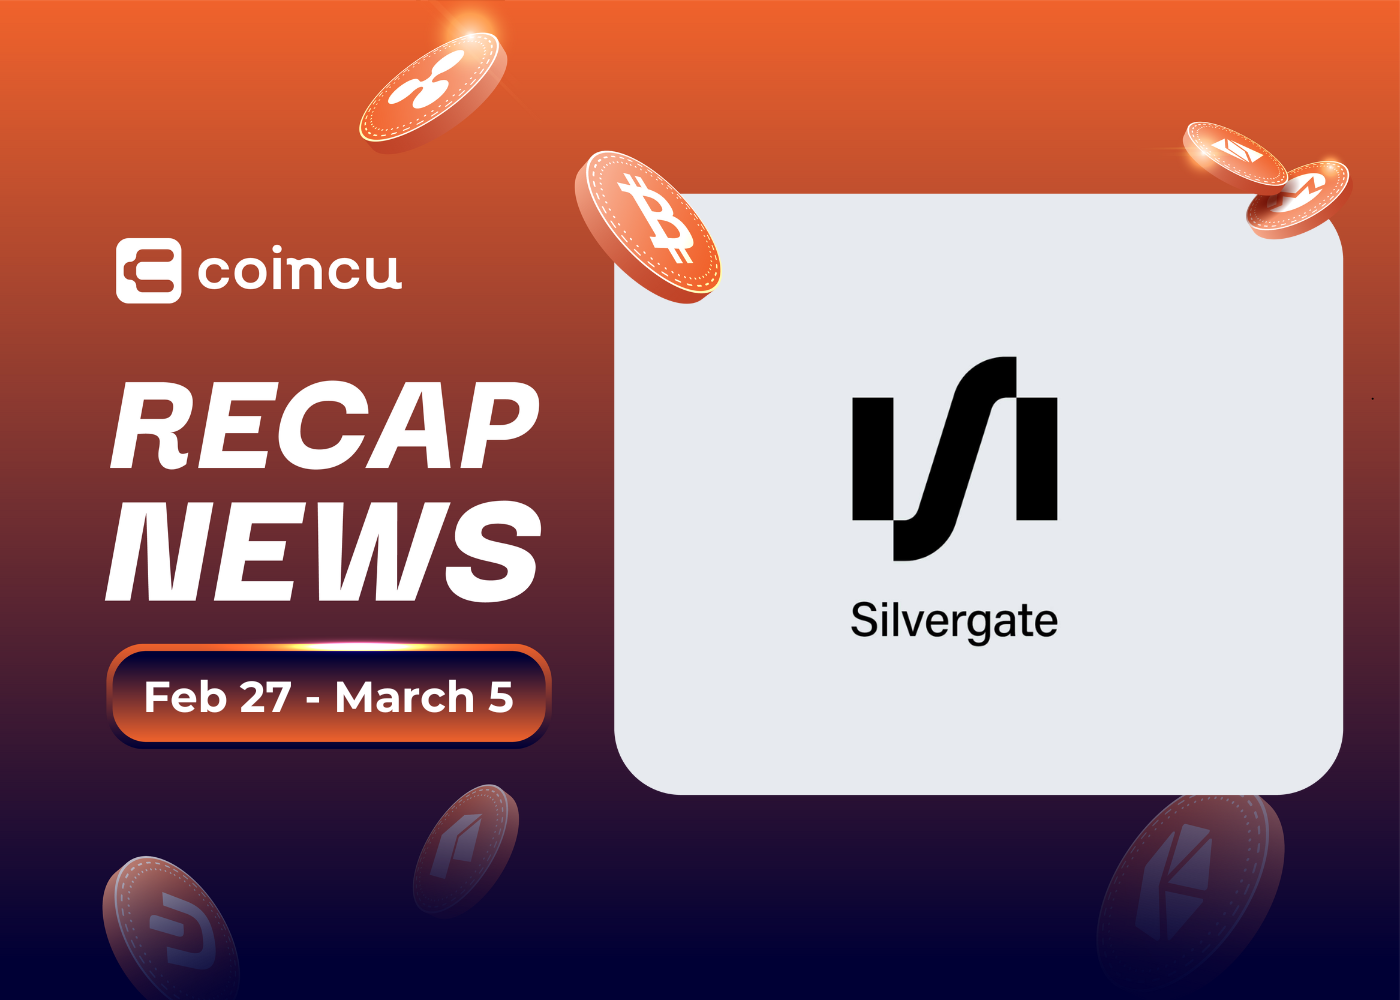 Weekly Top Crypto News (Feb 27 - March 5)